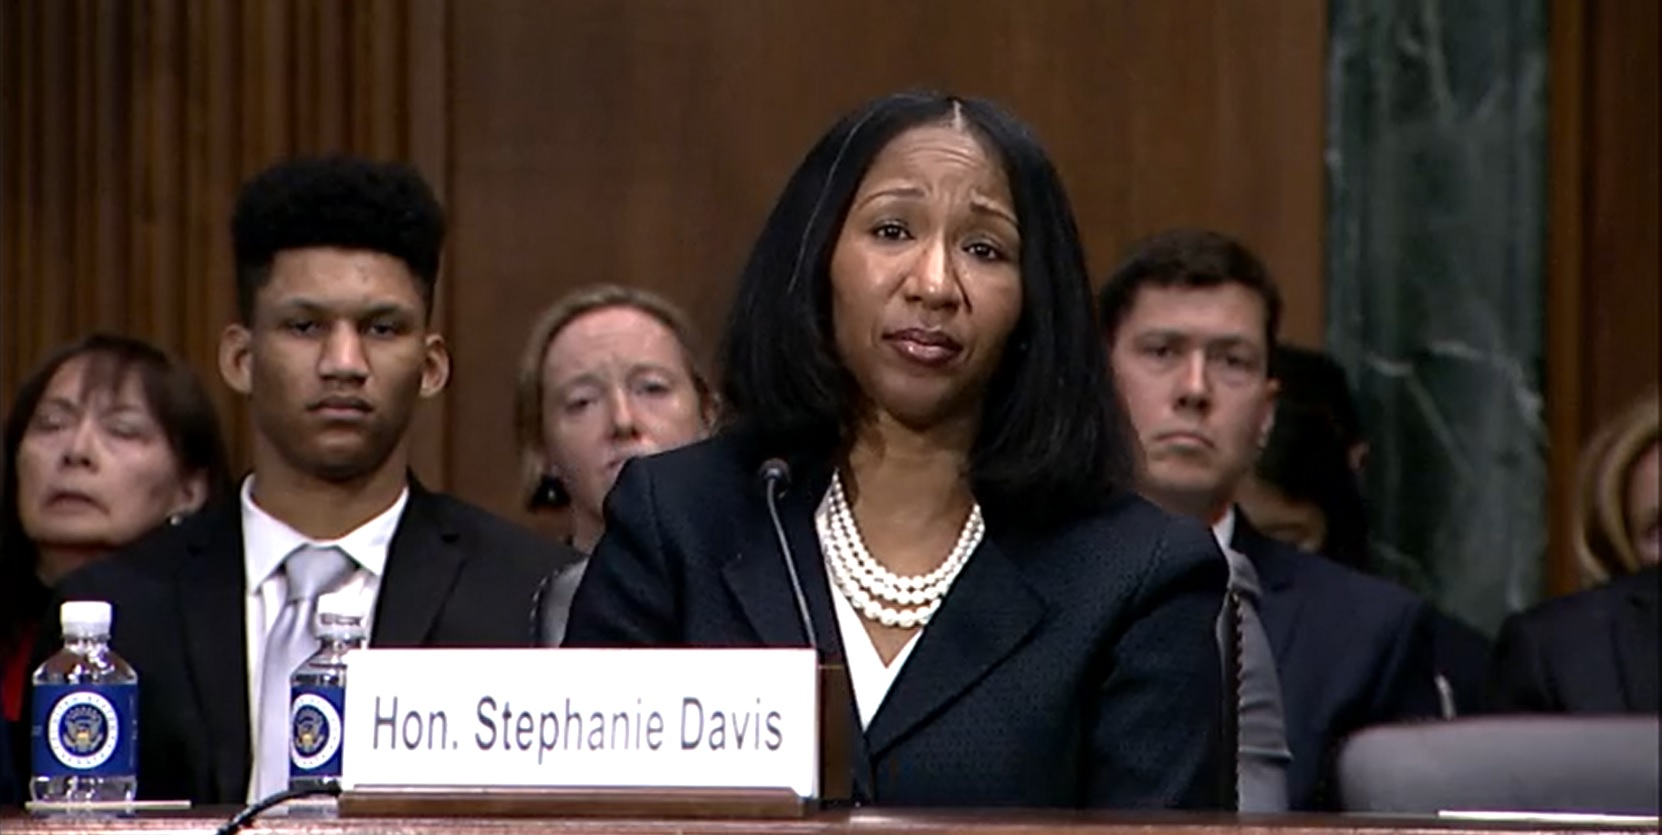 Stephanie Dawkins Davis, a nominee to serve as a judge on the 6th U.S. Circuit Court of Appeals, appears before the U.S. Senate Judiciary Committee in Washington, D.C., on March 2, 2022. U.S. Senate/Handout via REUTERS